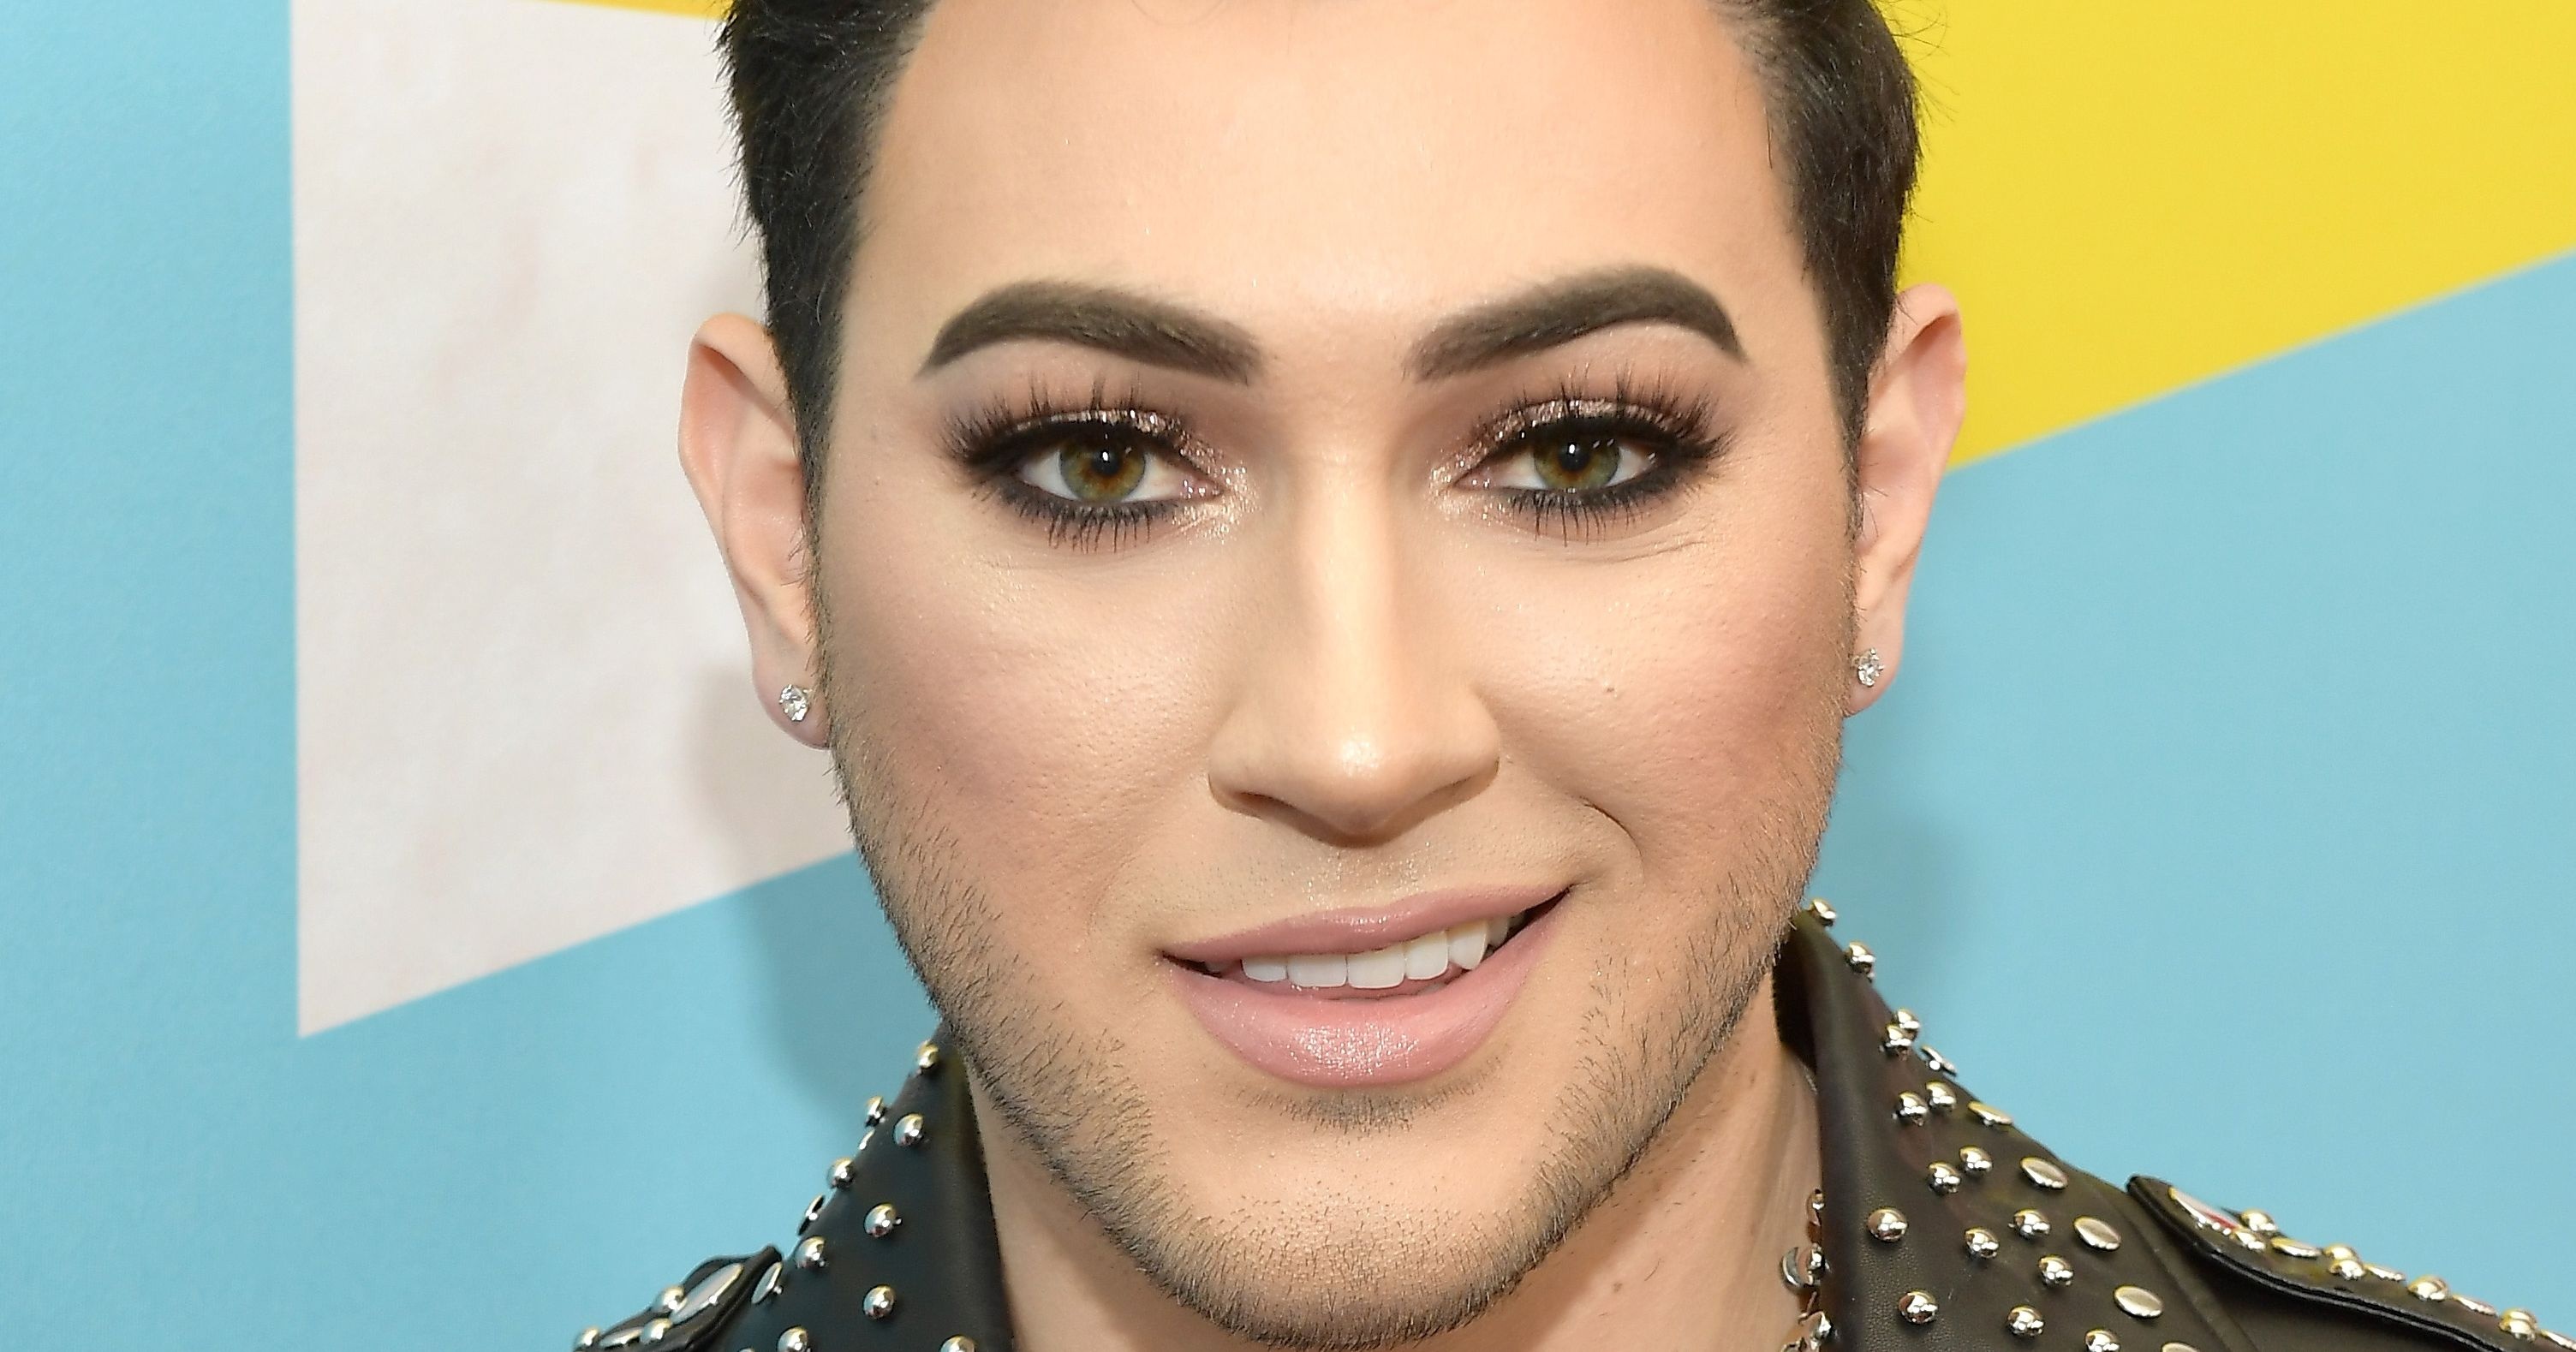 Manny MUA, Conflict with brand, Sexist allegations, Unsettling situation, 3010x1580 HD Desktop